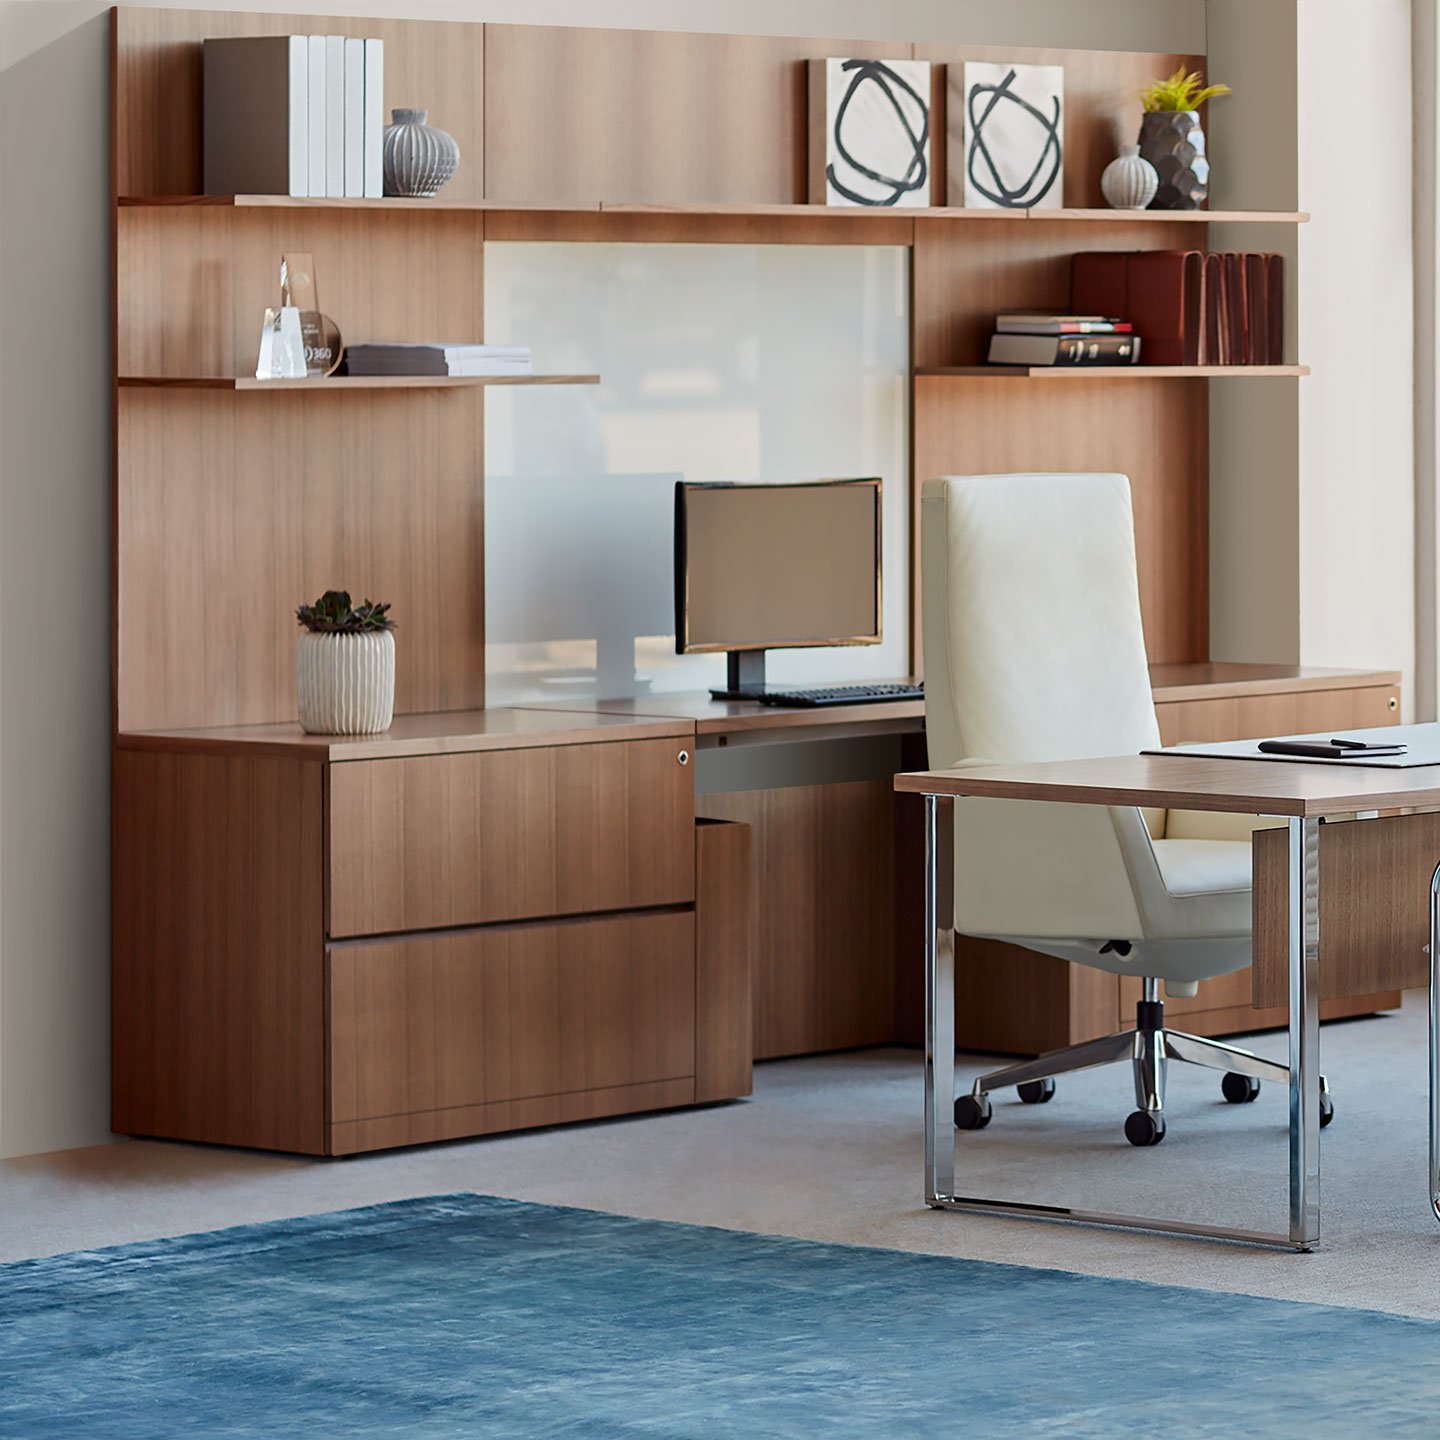 Haworth Masters Series Workspace with veneer desk in private office space with monitor and keyboard on it with white chair